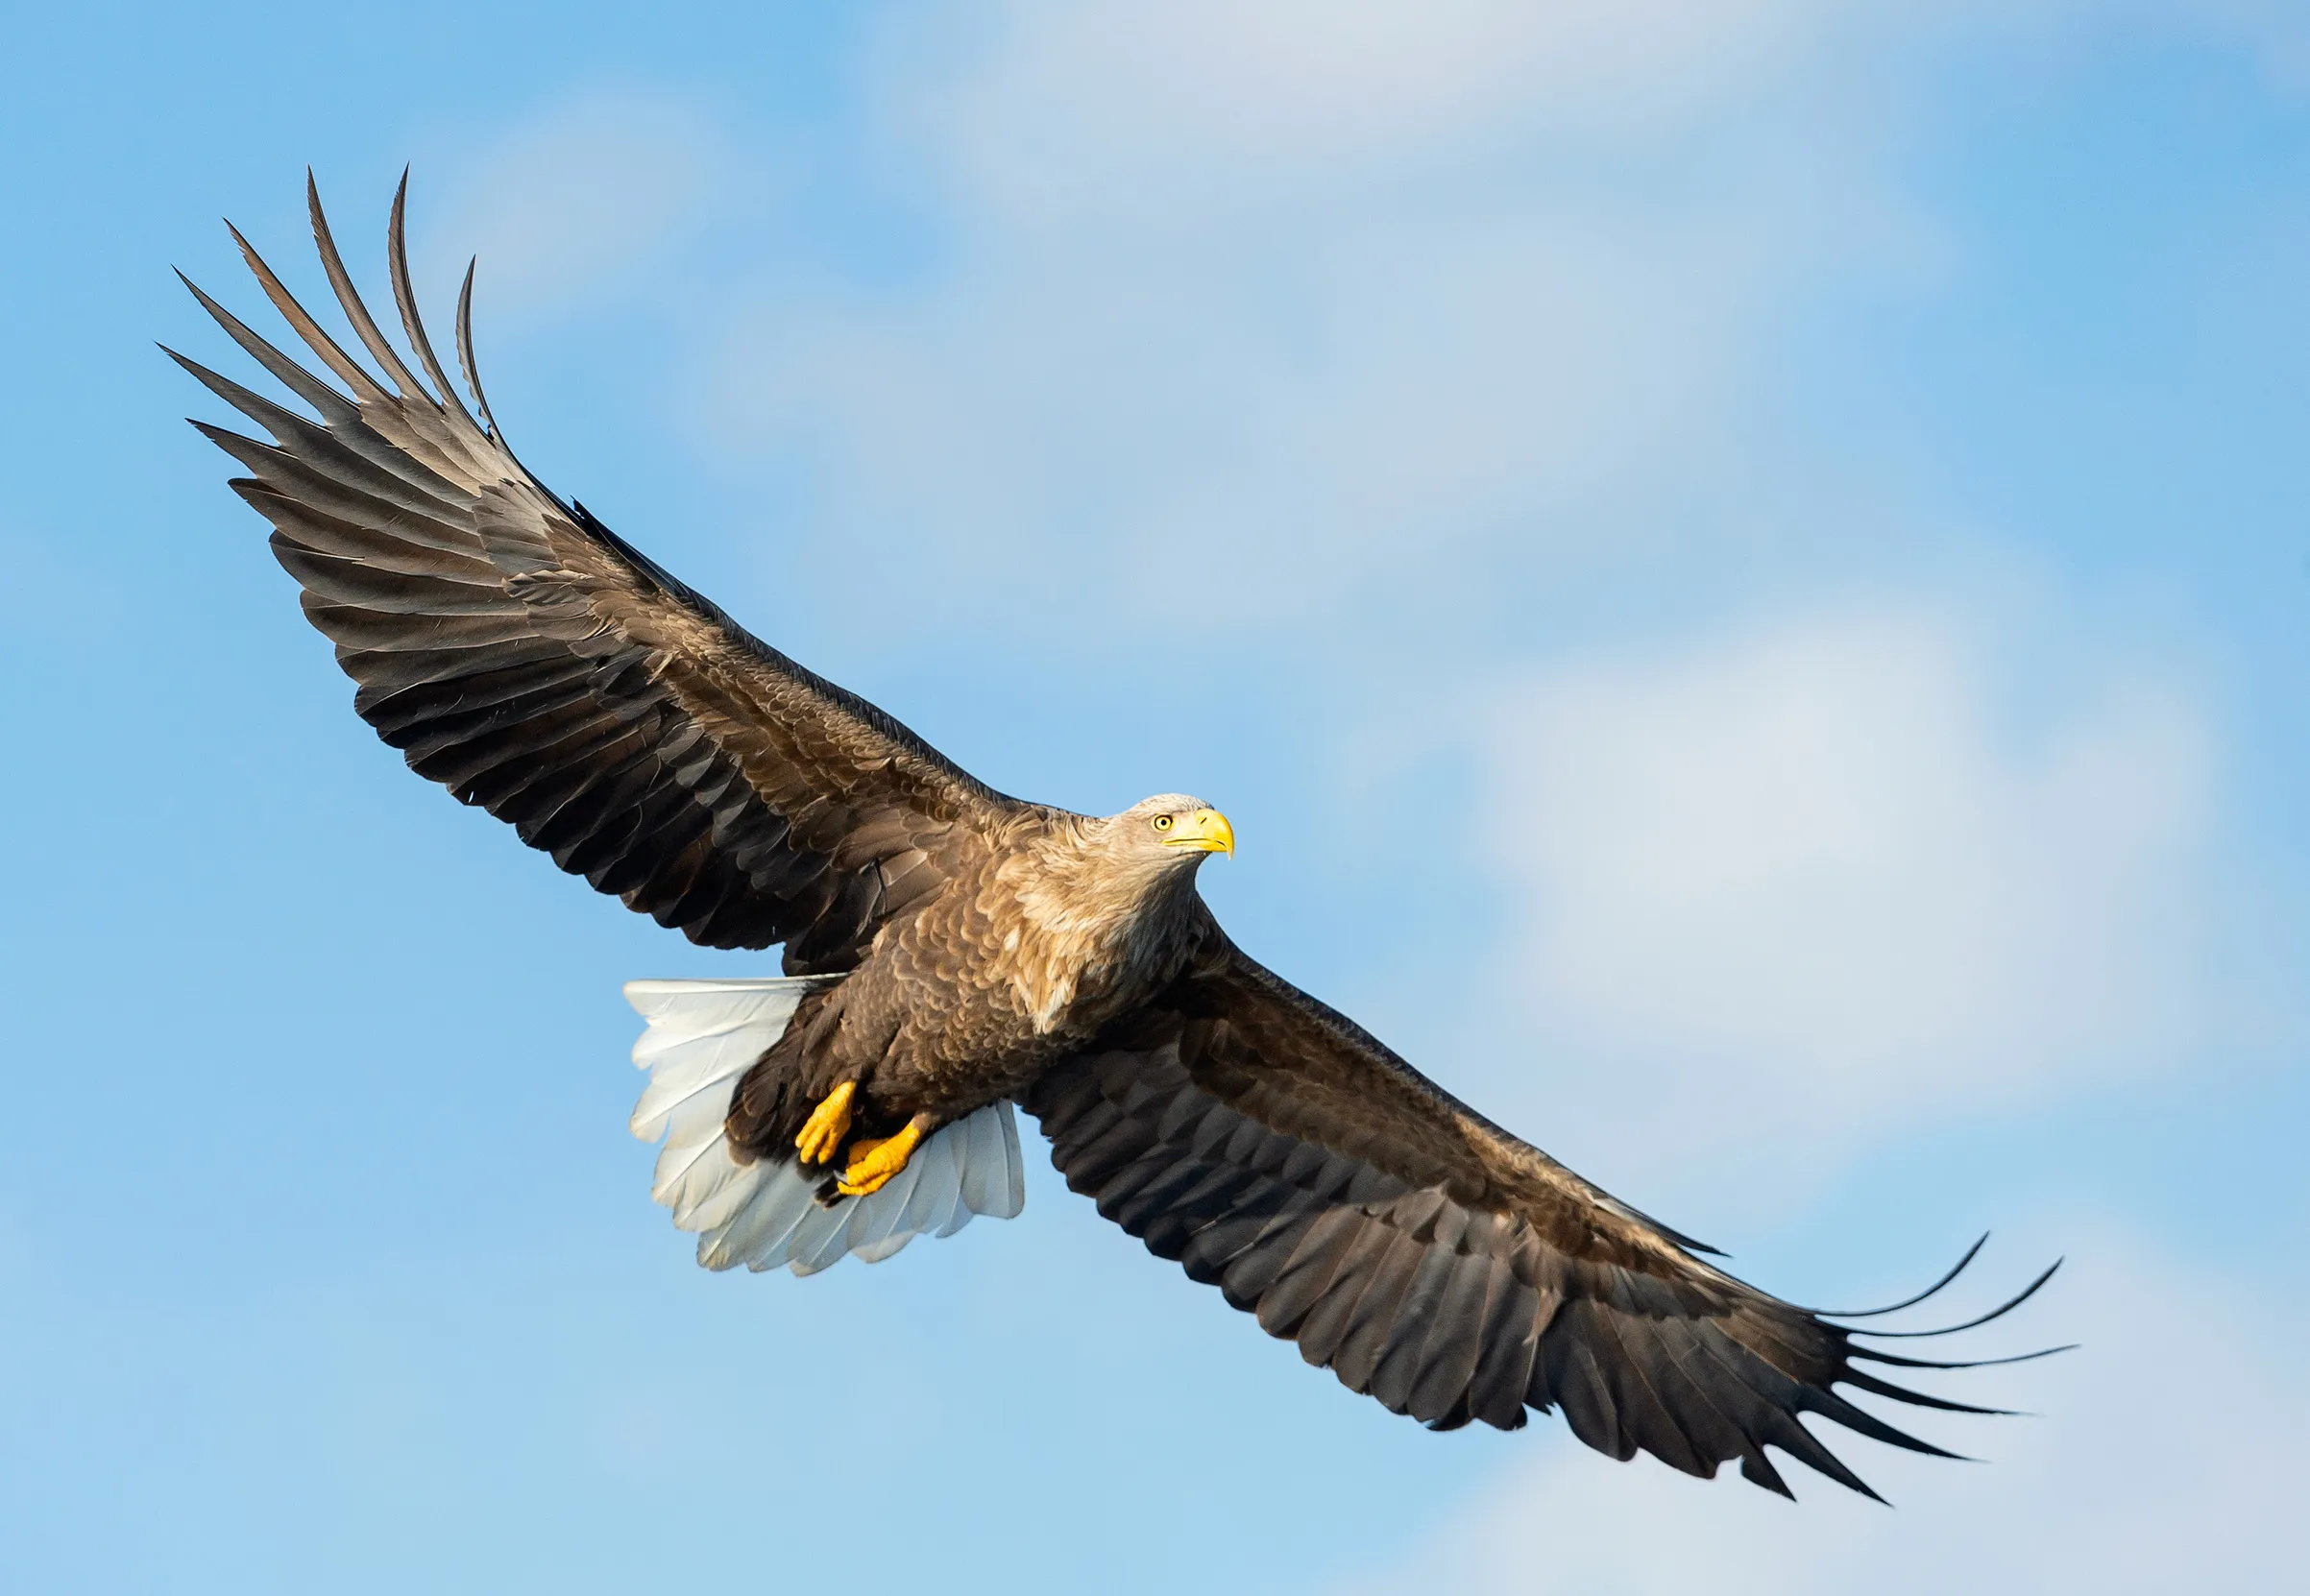 Adult White-tailed Eagle in flight with a blue sky background.